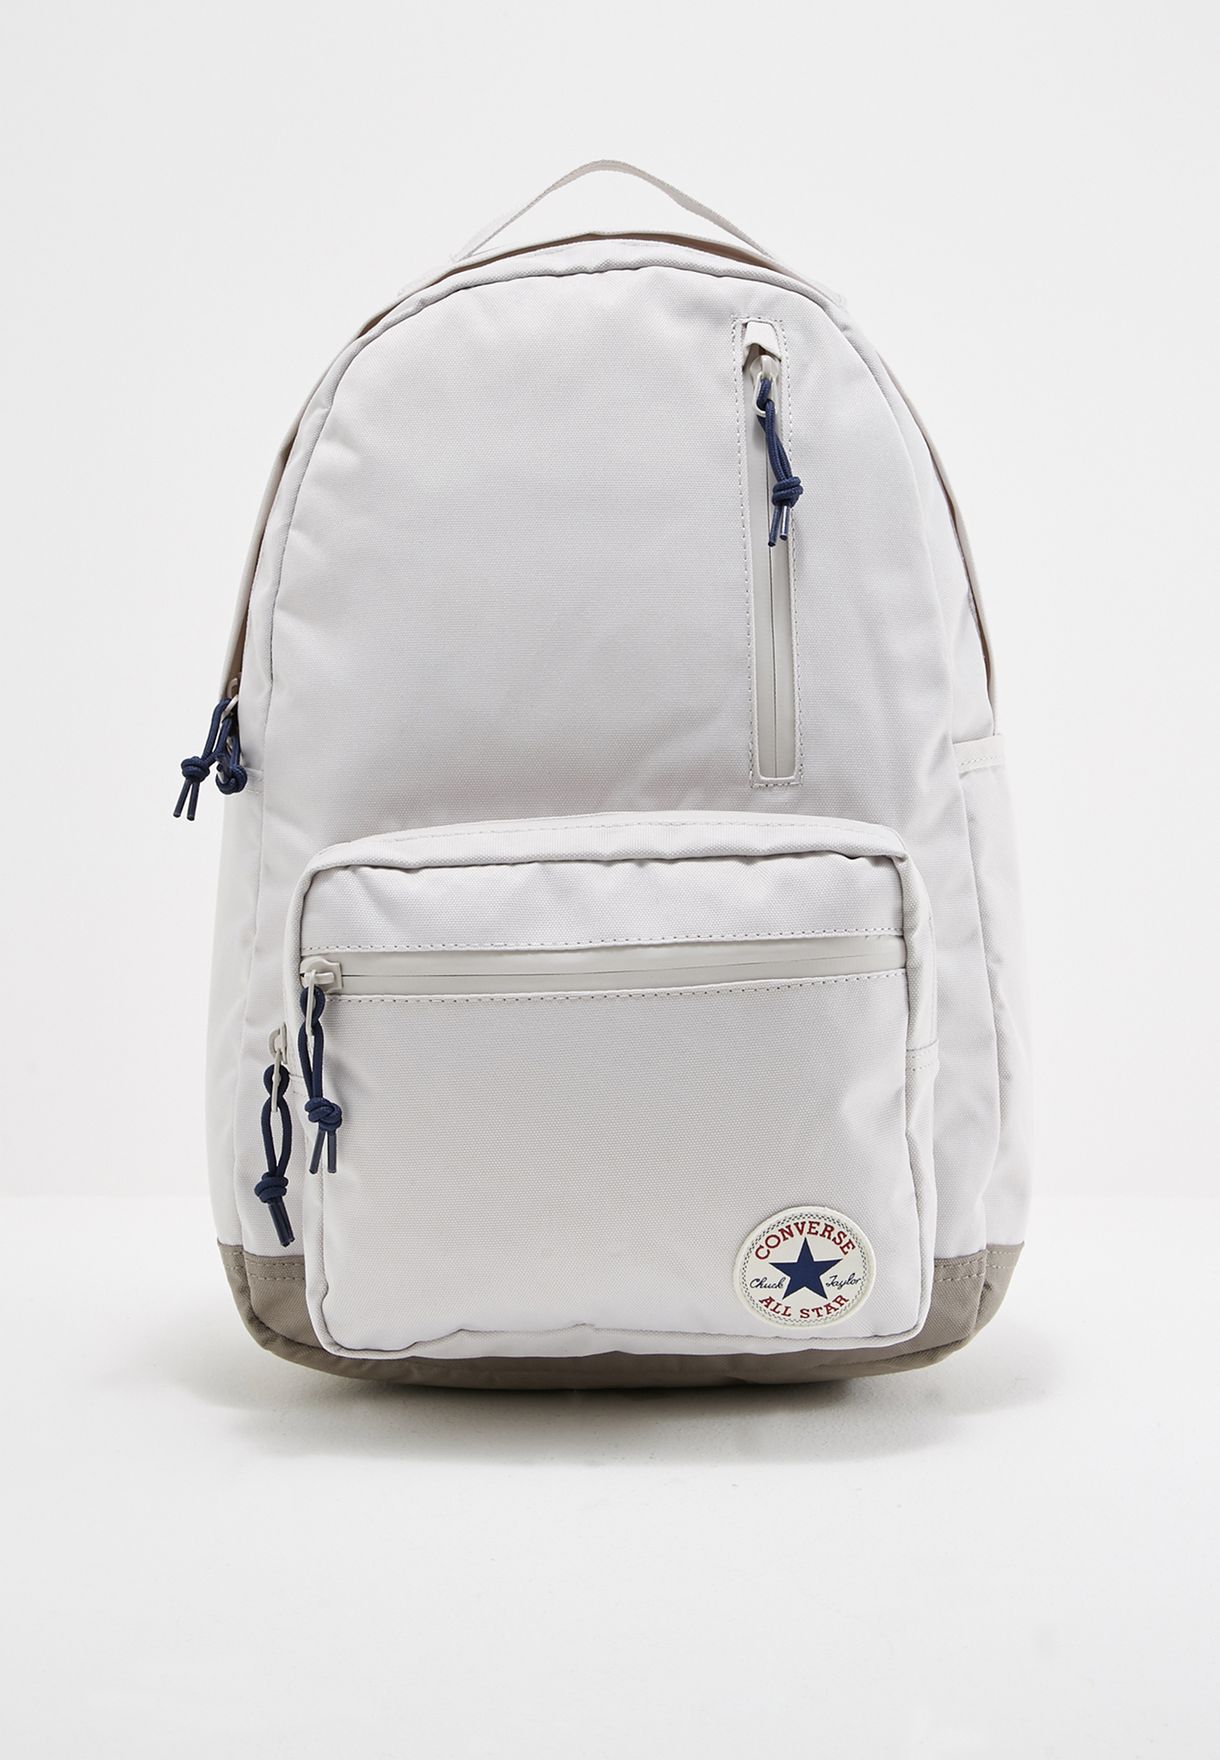 converse go backpack white grey 